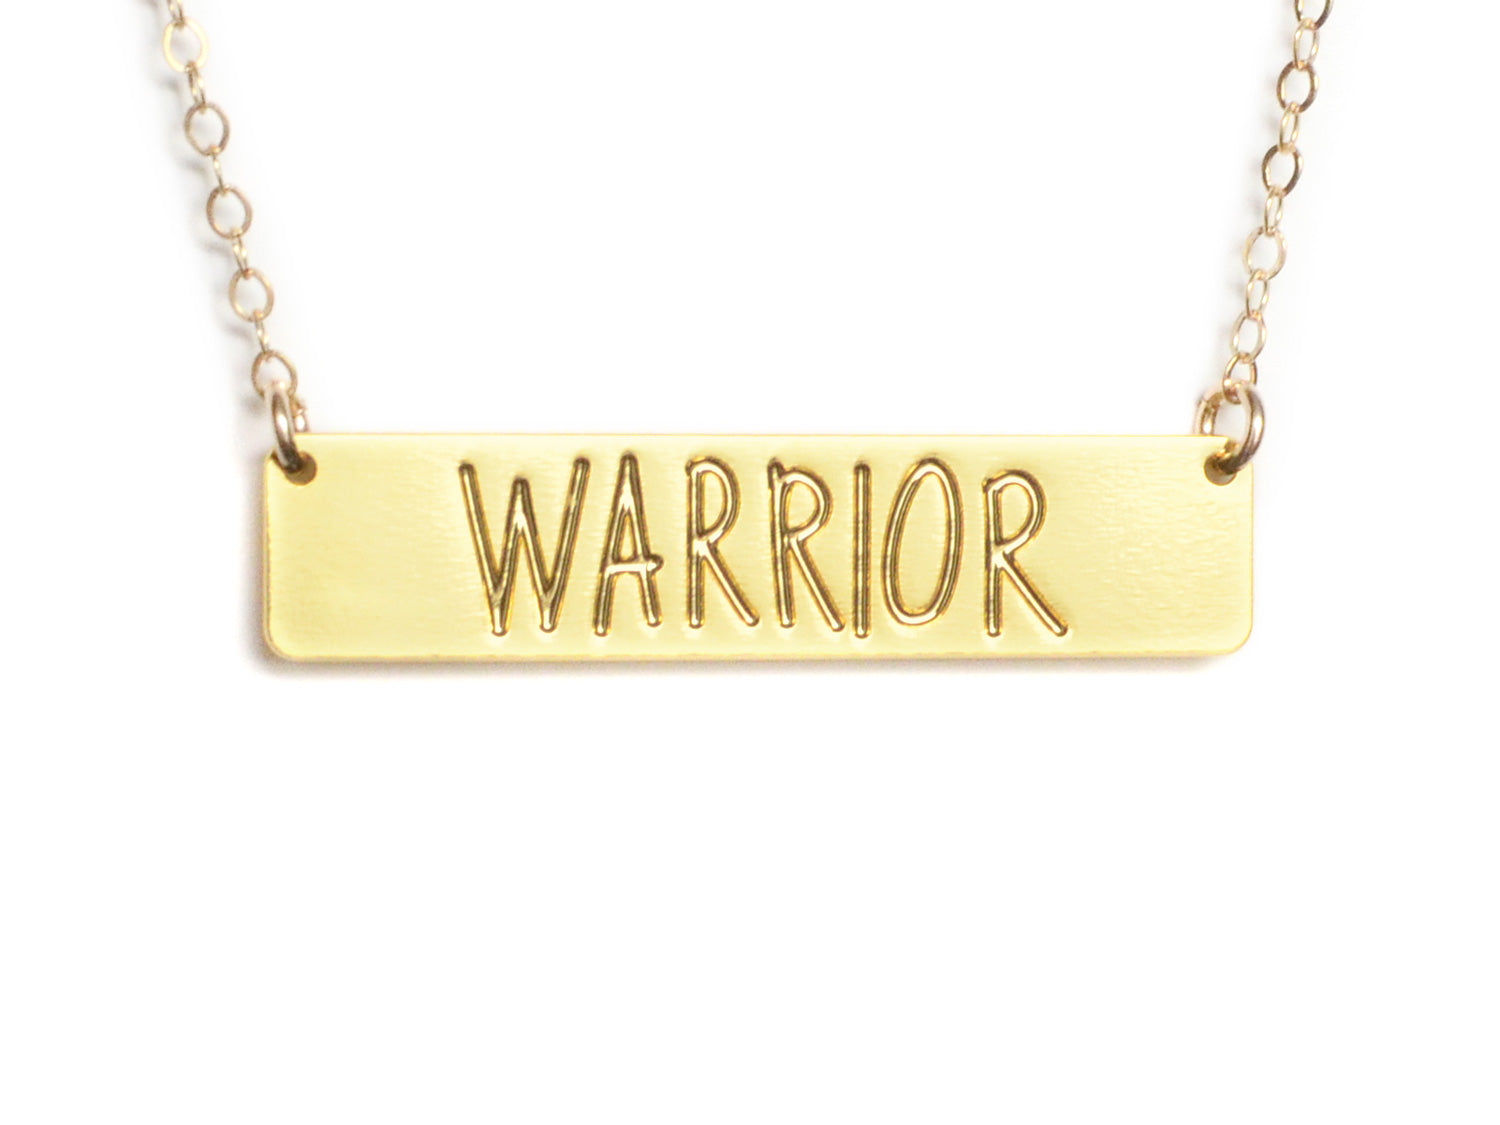 Warrior Bar Necklace - High Quality, Affordable, Hand Written, Self Love, Mantra Word Necklace - Available in Gold and Silver - Made in USA - Brevity Jewelry